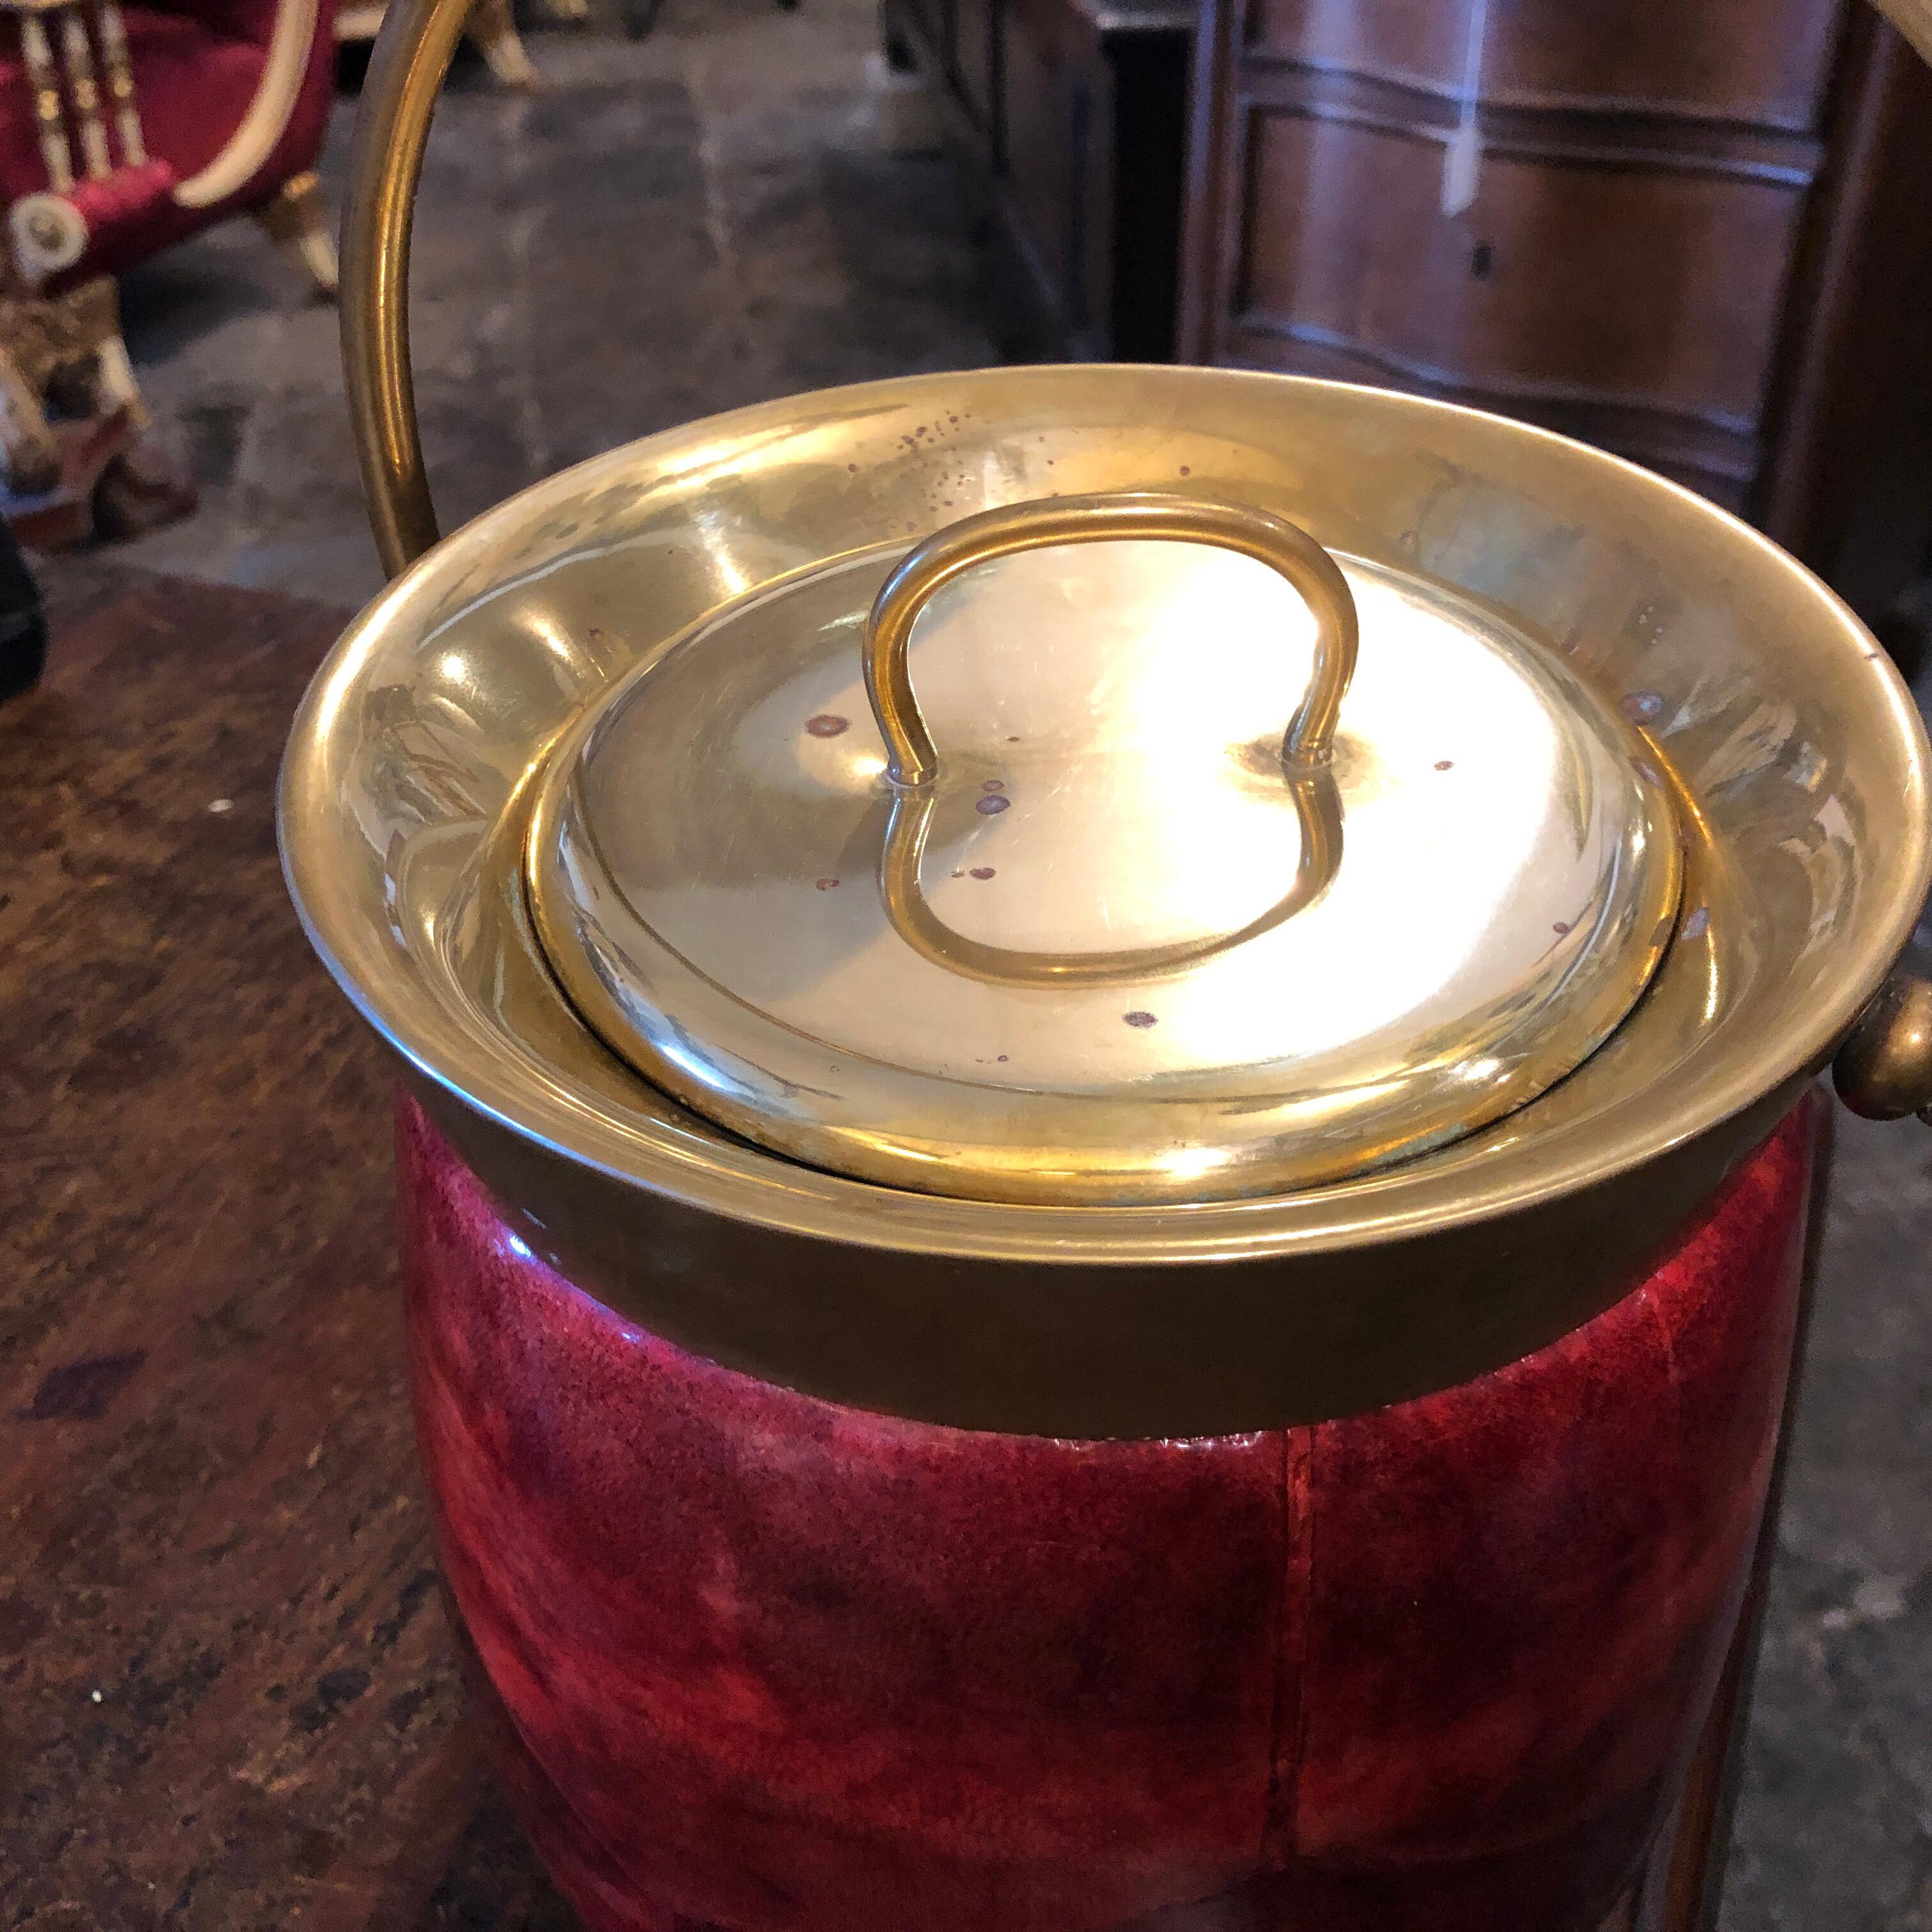 An iconic ice bucket designed by Aldo Tura, made in Italy in the Fifties, it has a little break in the inside glass visible in a photo.